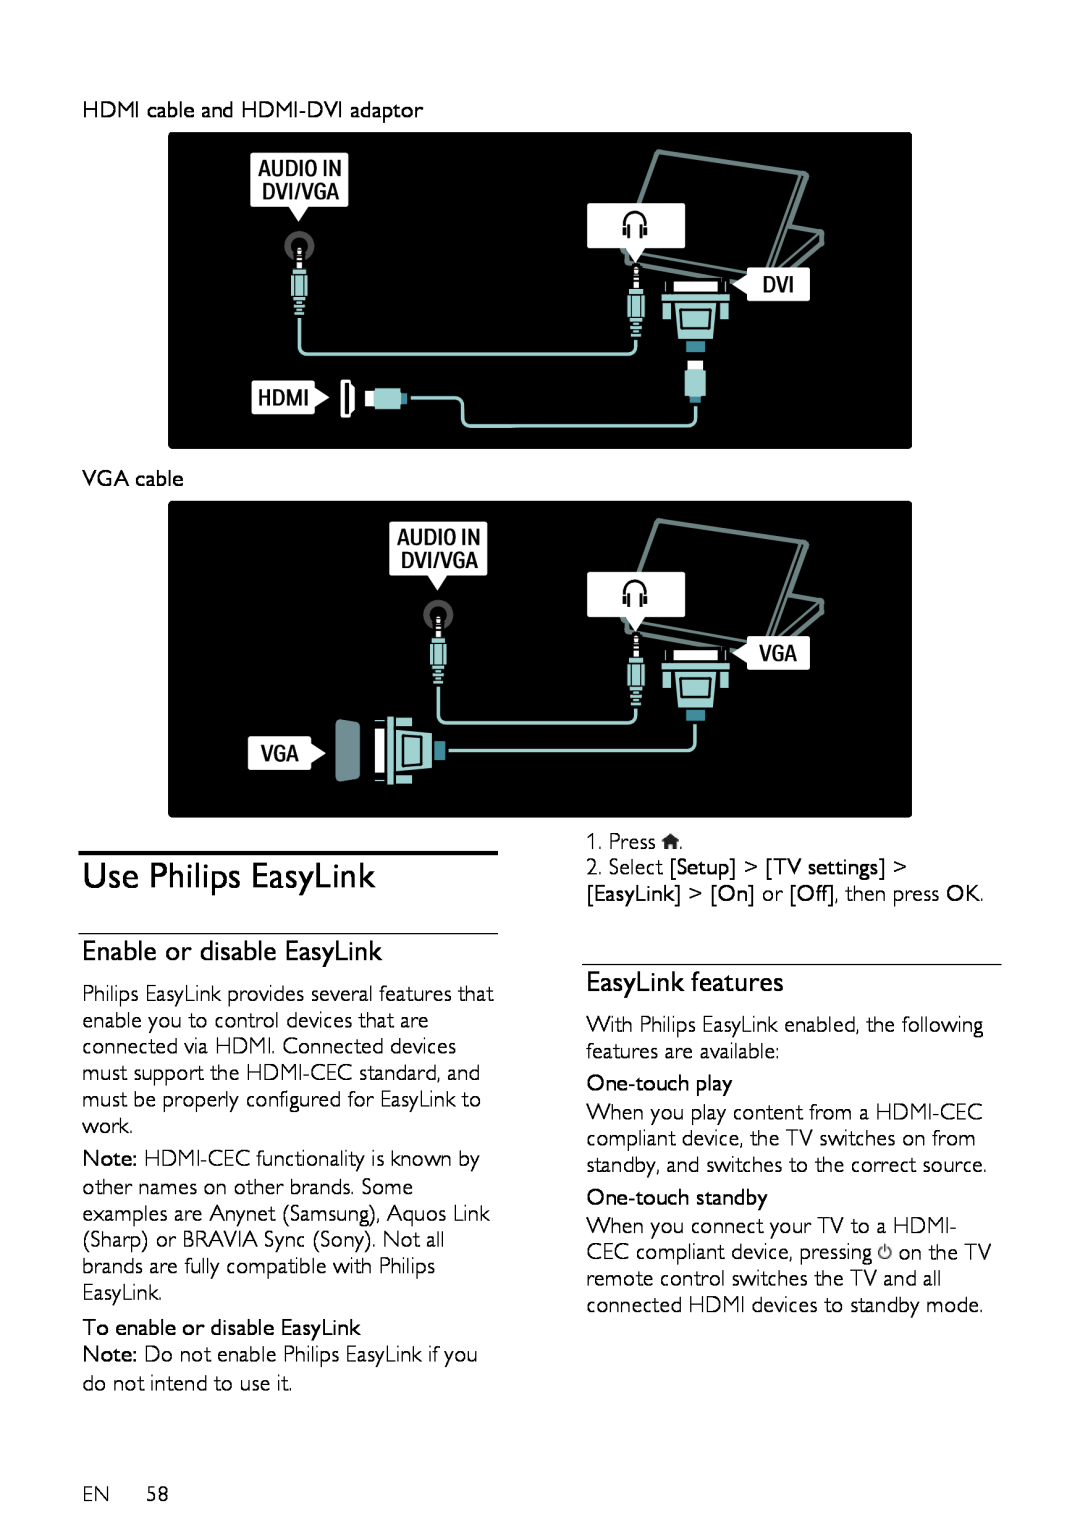 Philips 32PFL76X5H, 42PFL76X5H, 42PFL76X5C, 32PFL74X5H Use Philips EasyLink, Enable or disable EasyLink, EasyLink features 